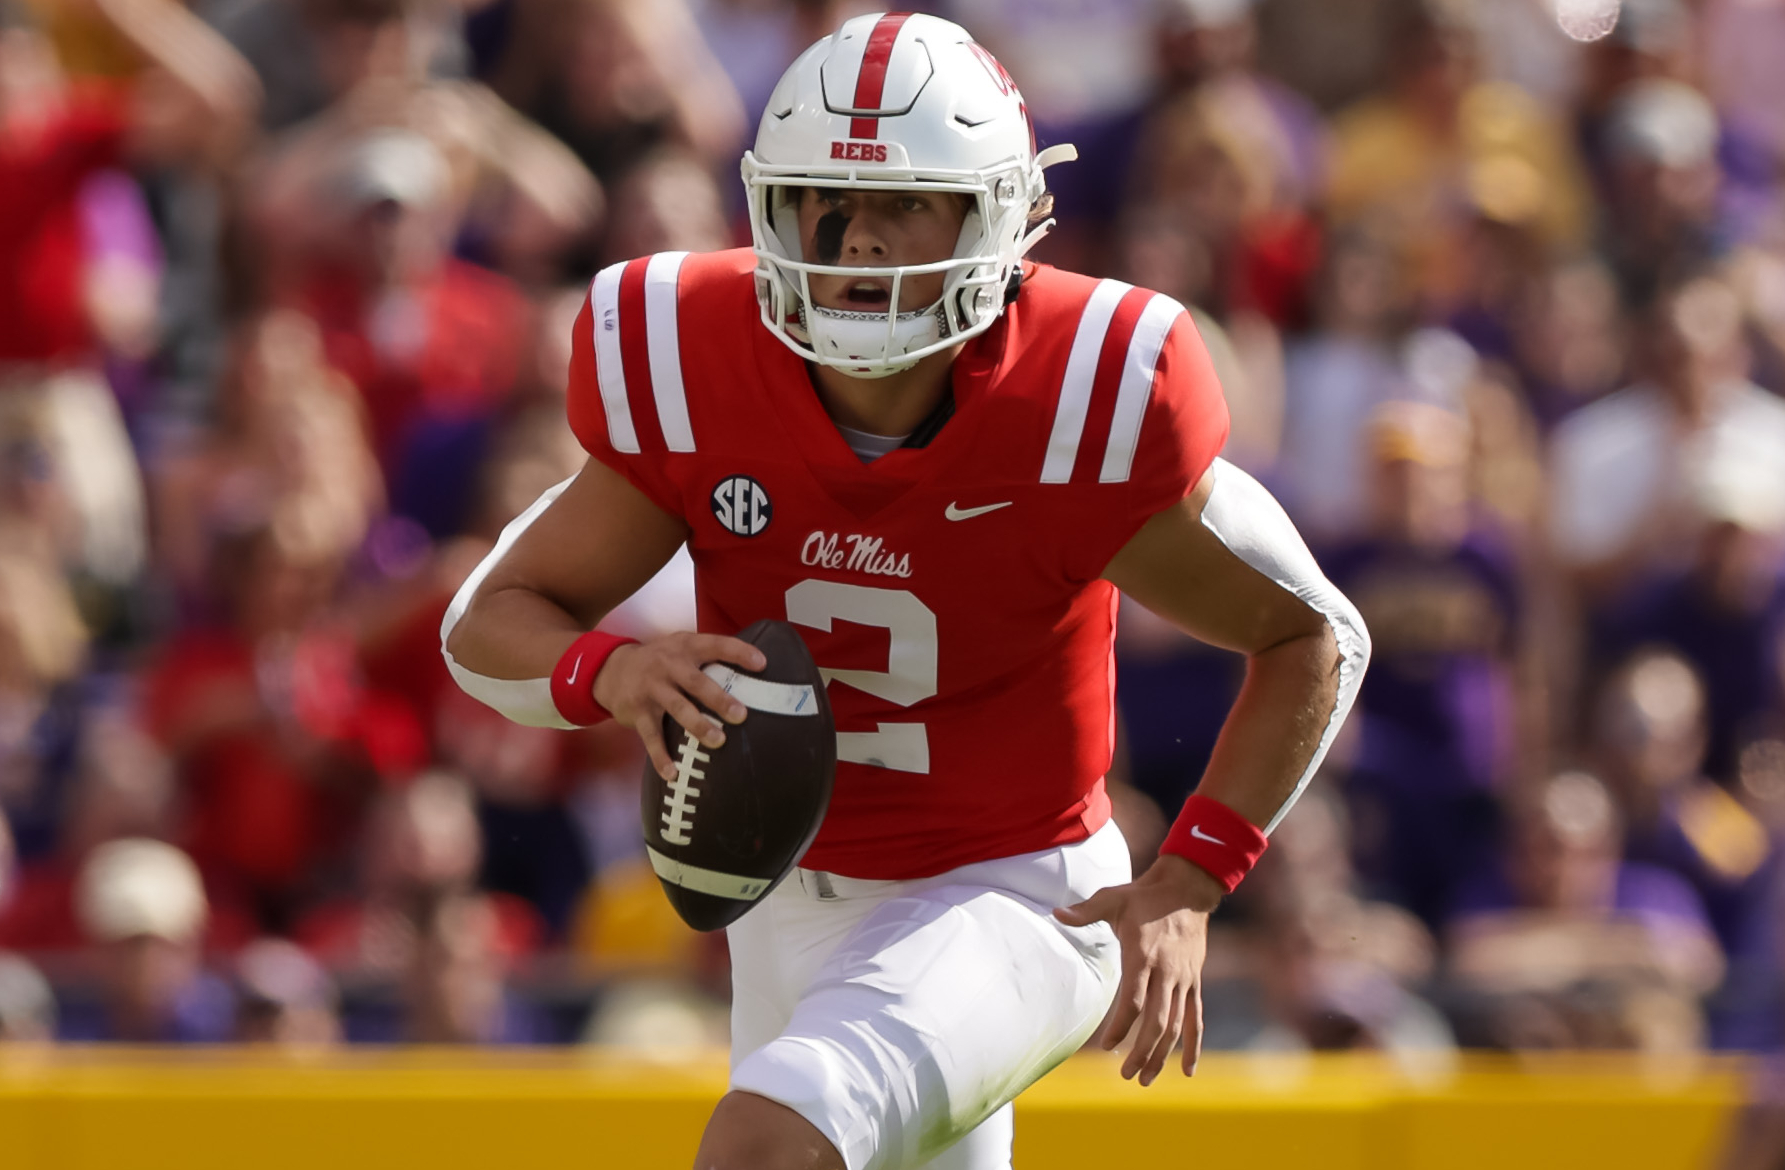 2023 Ole Miss football schedule: Rebels games, dates, opponents